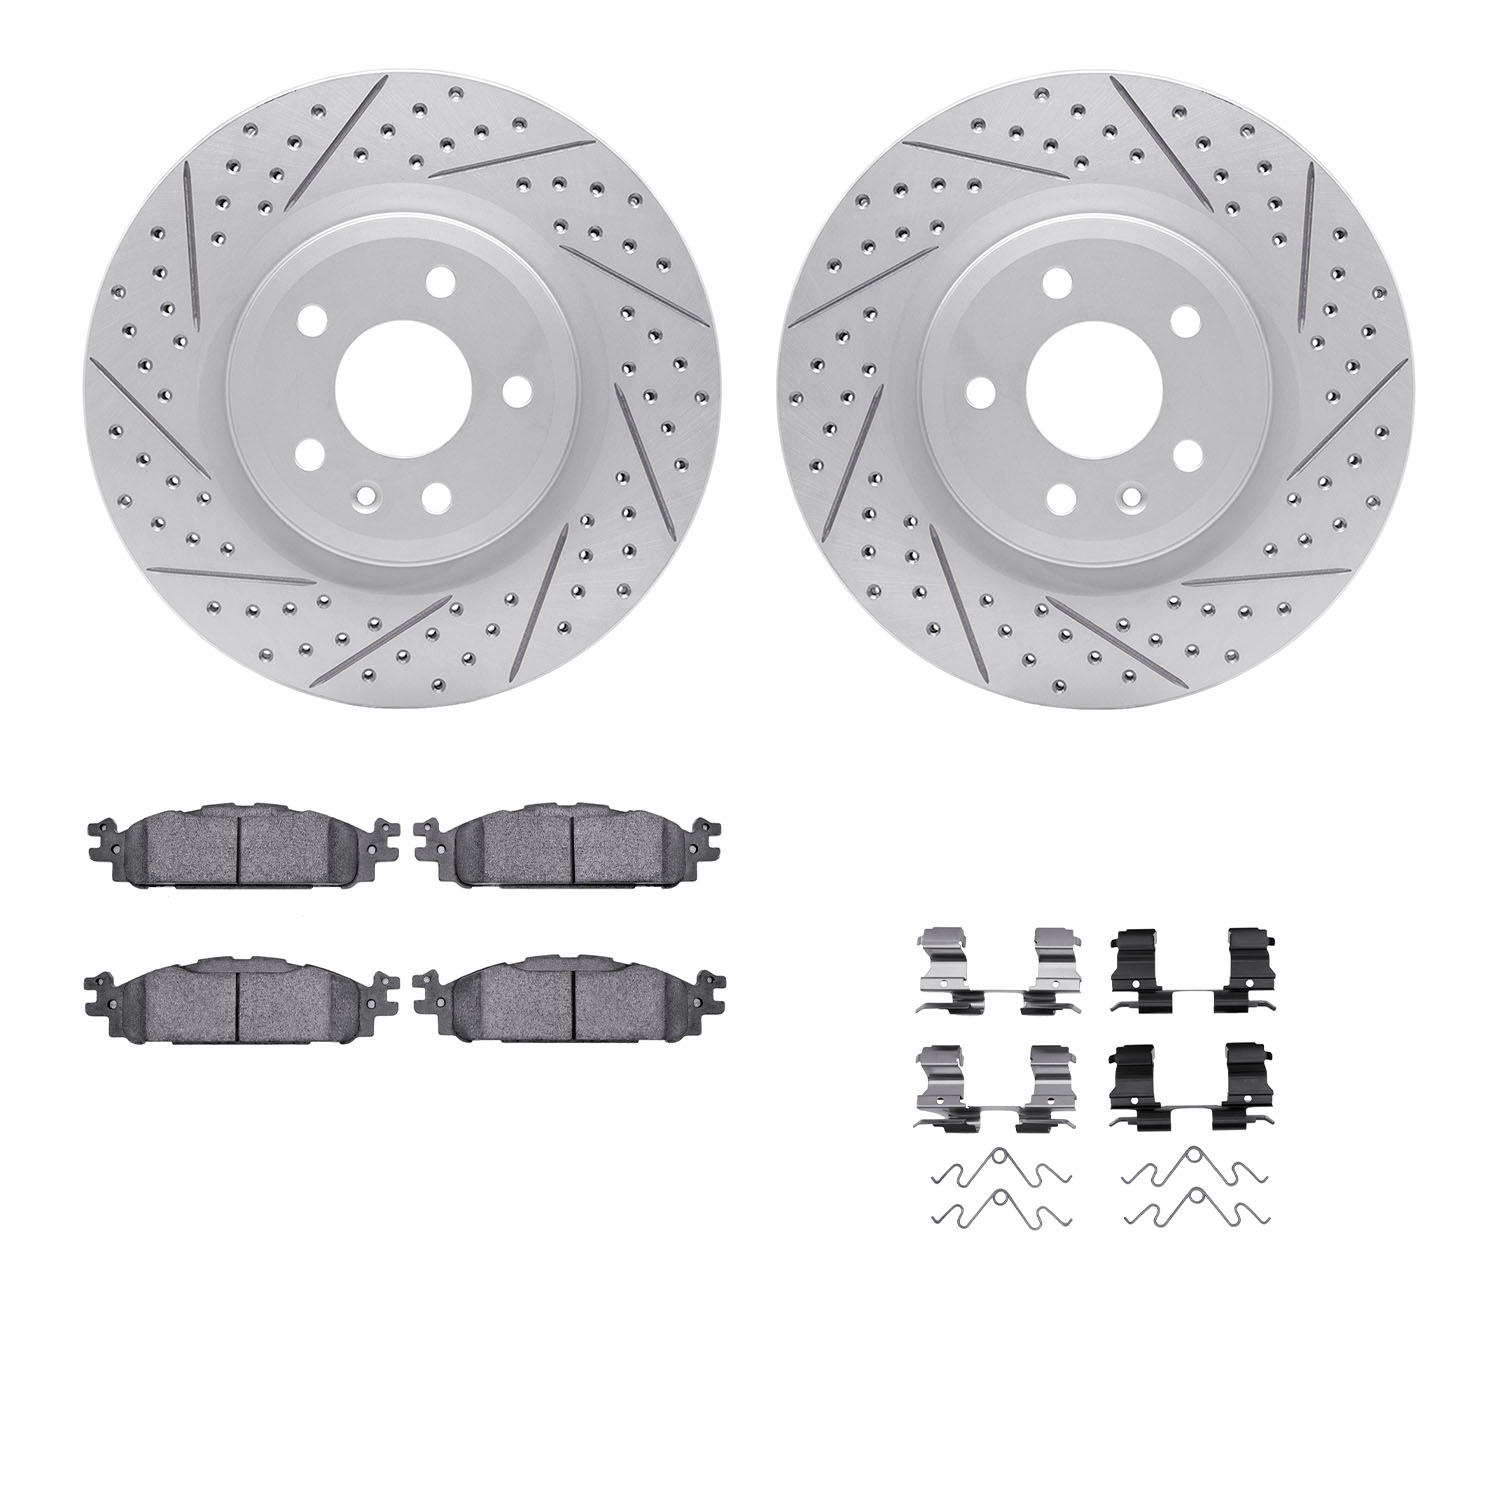 2212-54005 Geoperformance Drilled/Slotted Rotors w/Heavy-Duty Pads Kit & Hardware, 2011-2019 Ford/Lincoln/Mercury/Mazda, Positio